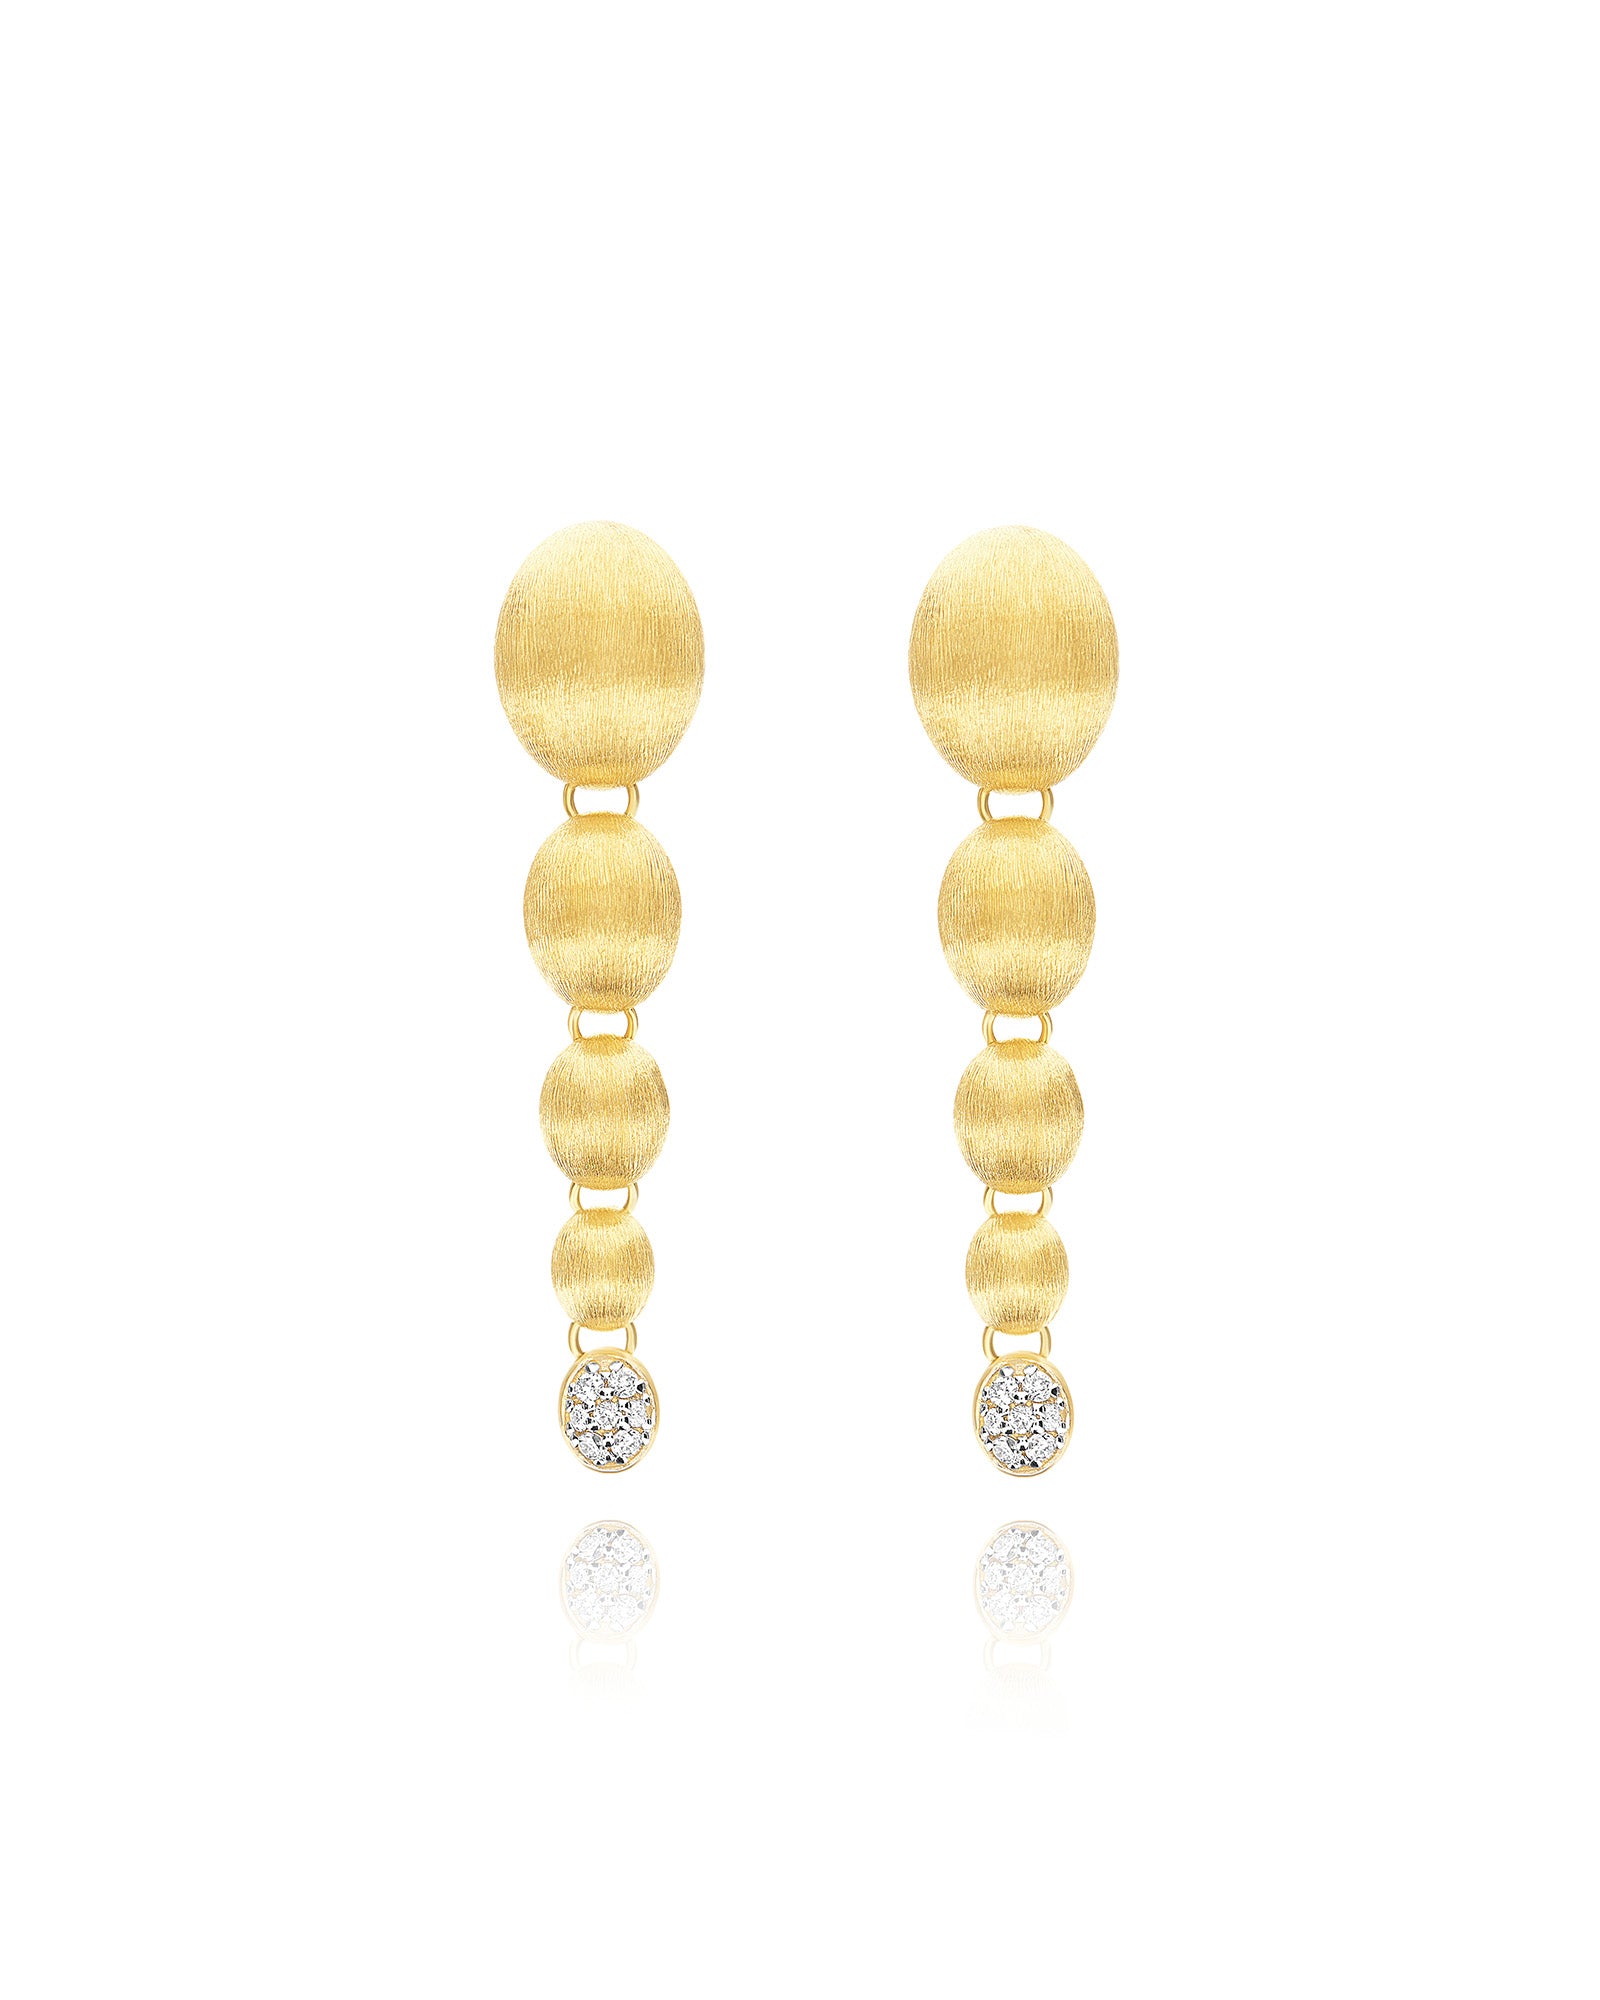 Ivy "nuvolette" Gold and Diamonds charming drop earrings